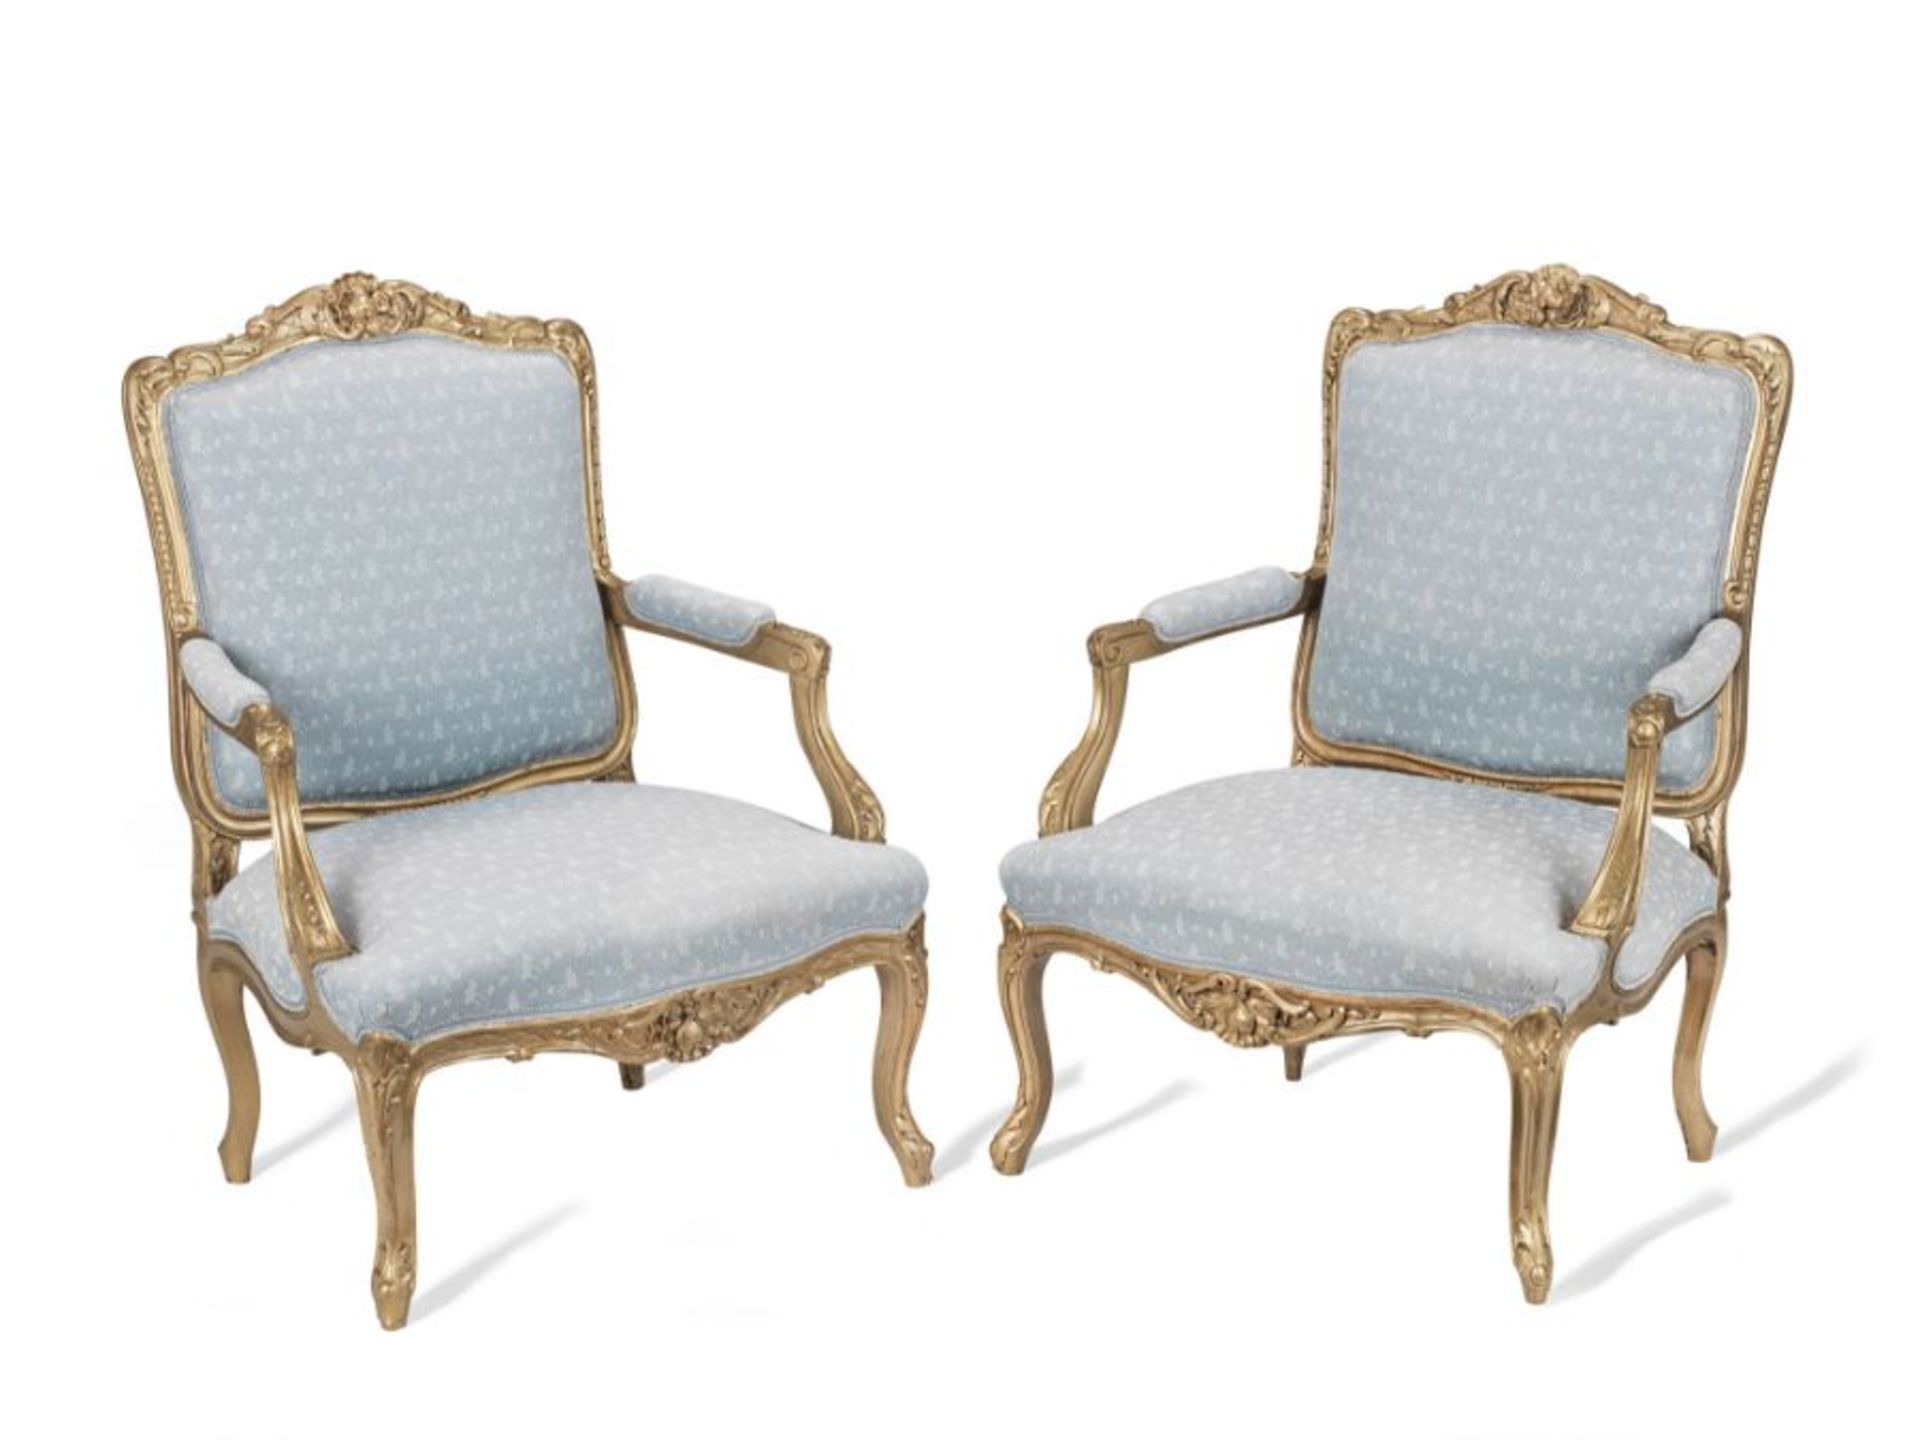 A pair of 20th century Louis XV style giltwood fauteuils